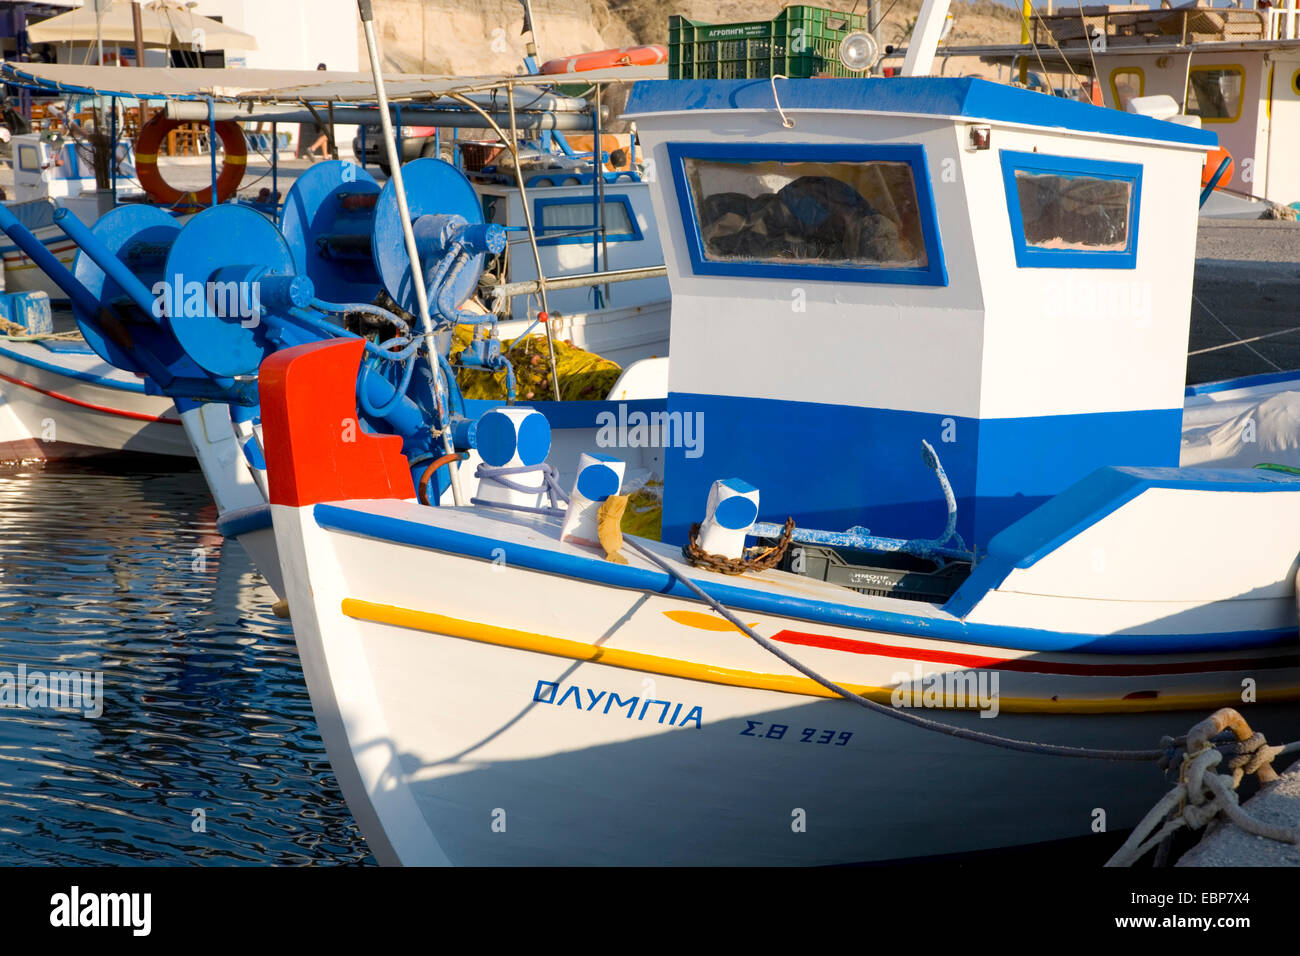 Vlyhada, Santorini, South Aegean, Greece. Colourful fishing boats in the harbour. Stock Photo